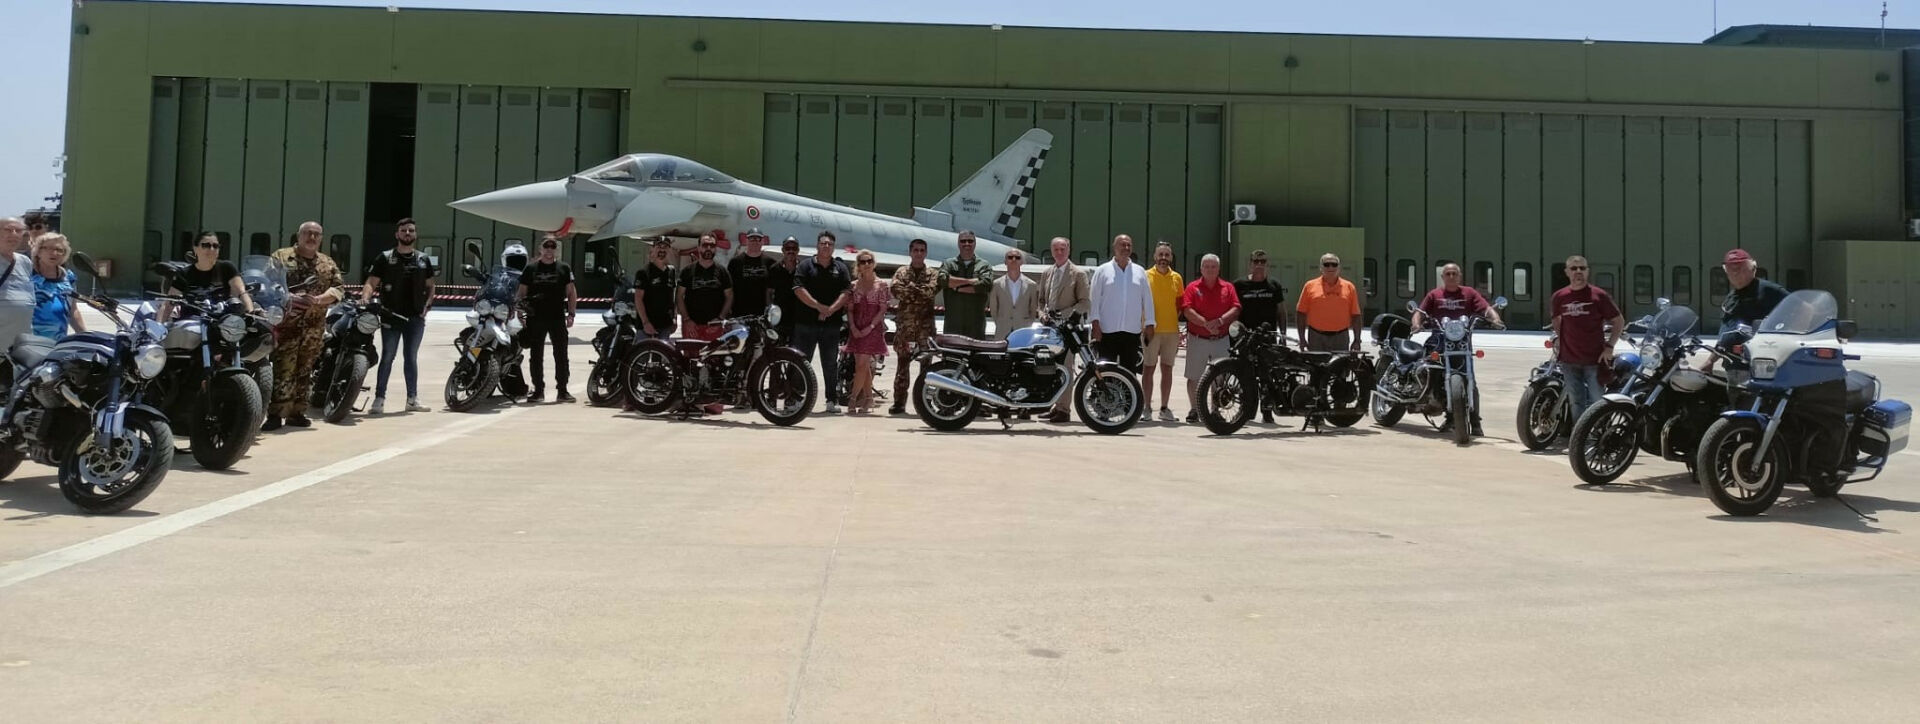 Motorcycle and aviation enthusiasts gather with a Eurofighter Typhoon of the Italian Air Force's 37th Stormo and Elena Bagnasco (center), President of the Giorgio Parodi Association and granddaughter of Moto Guzzi Co-Founder Giorgio Parodi. Photo courtesy Giorgio Parodi Association.